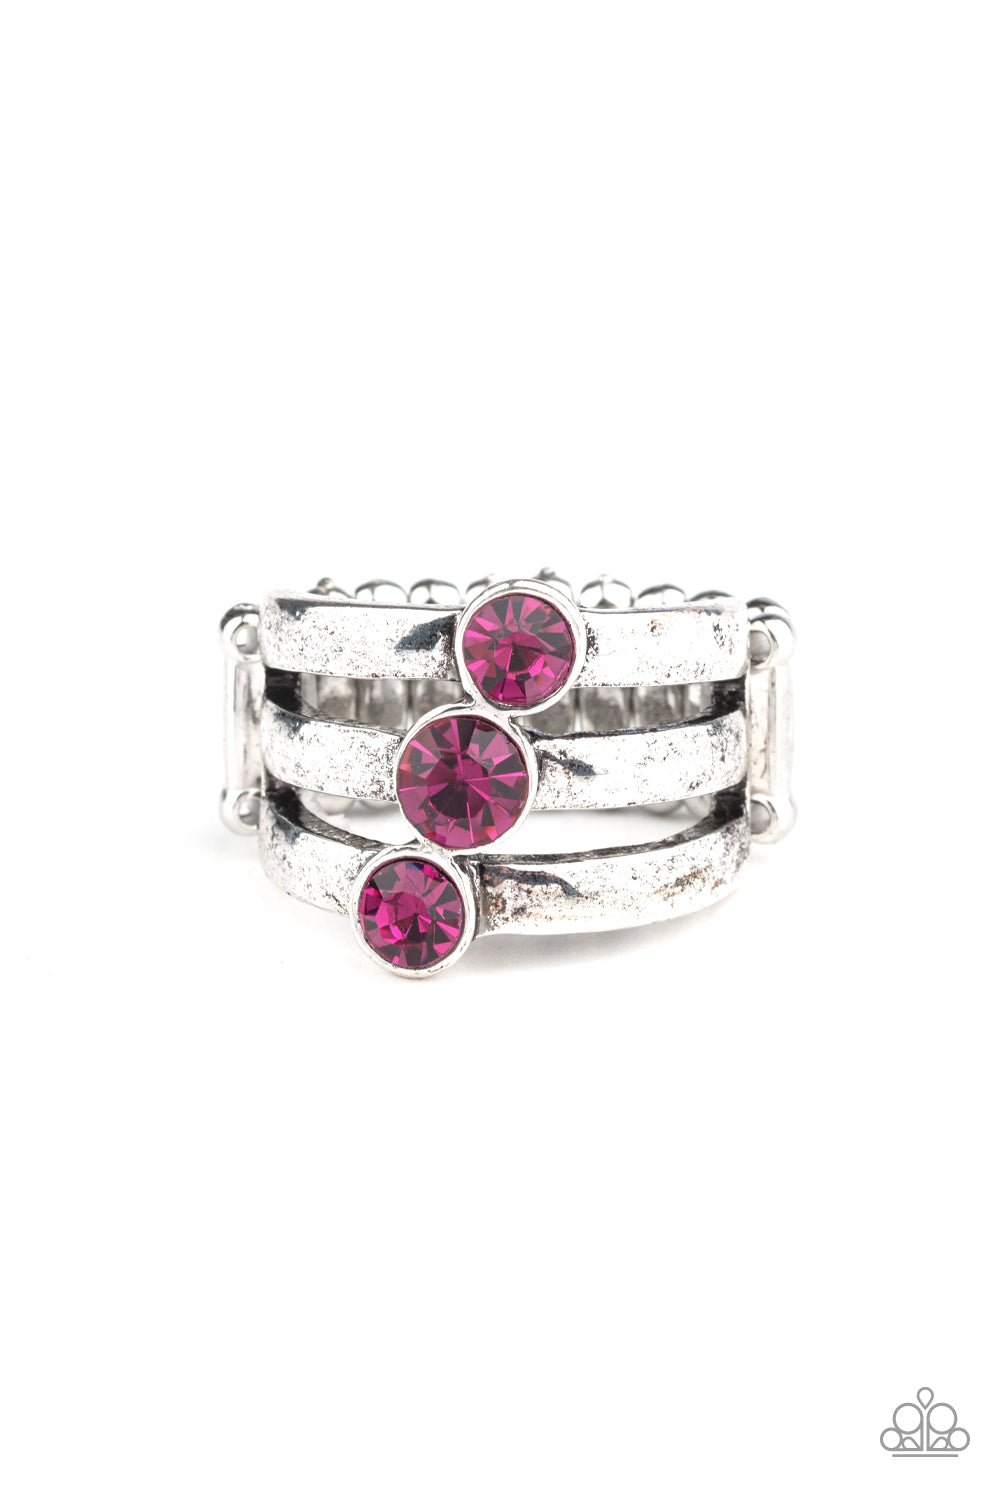 Paparazzi Rings - Triple The Twinkle - Pink